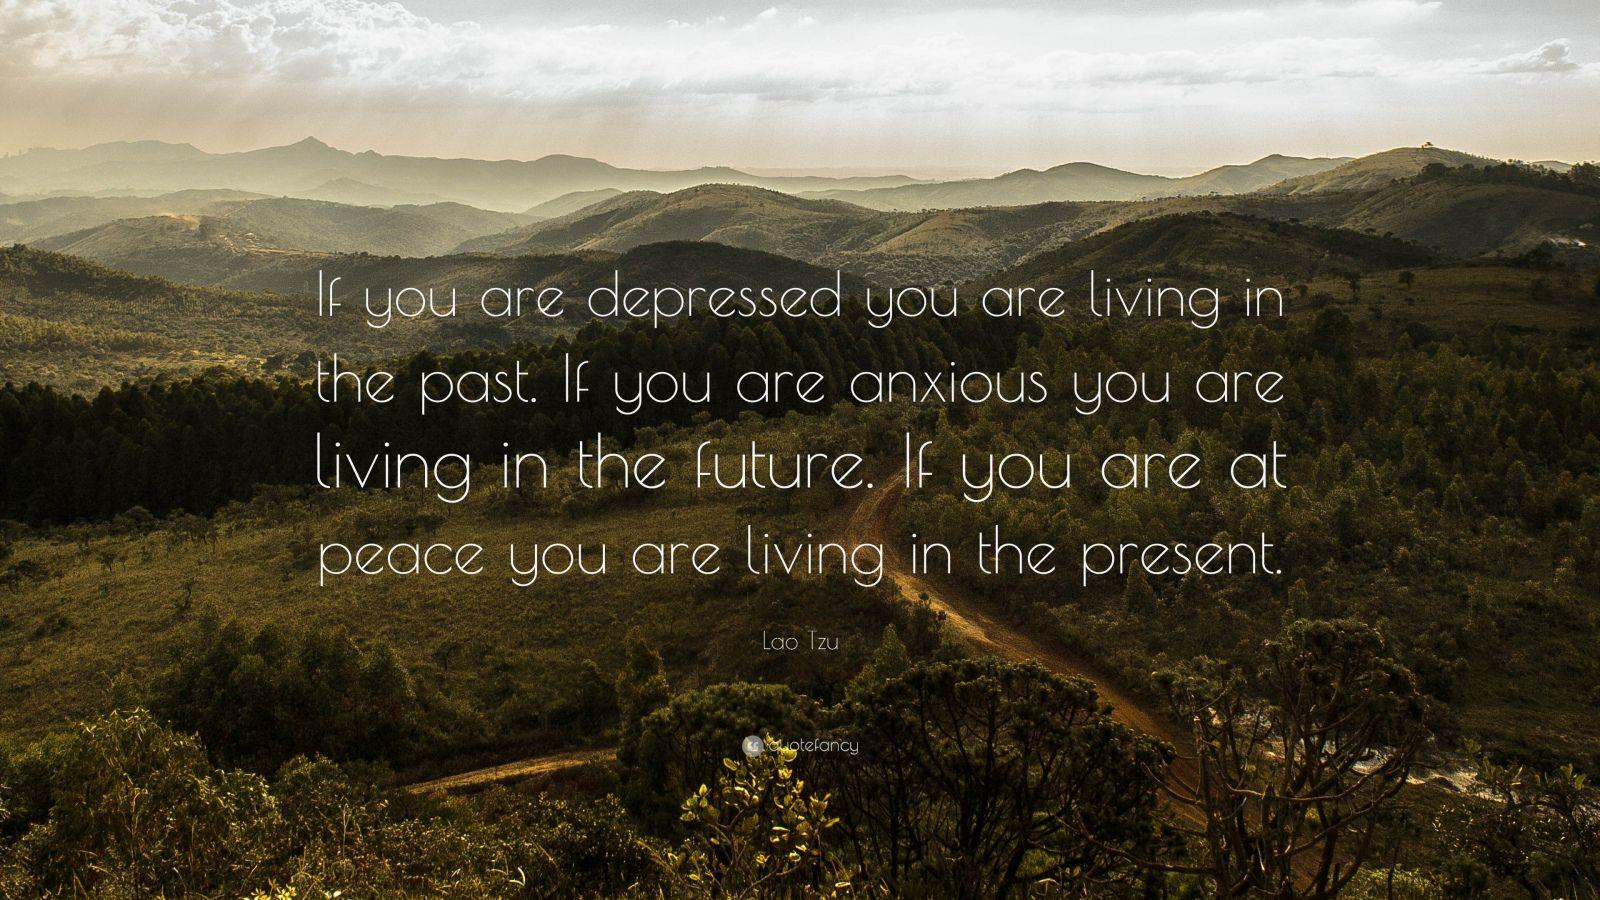 "If you are depressed you are living in the...